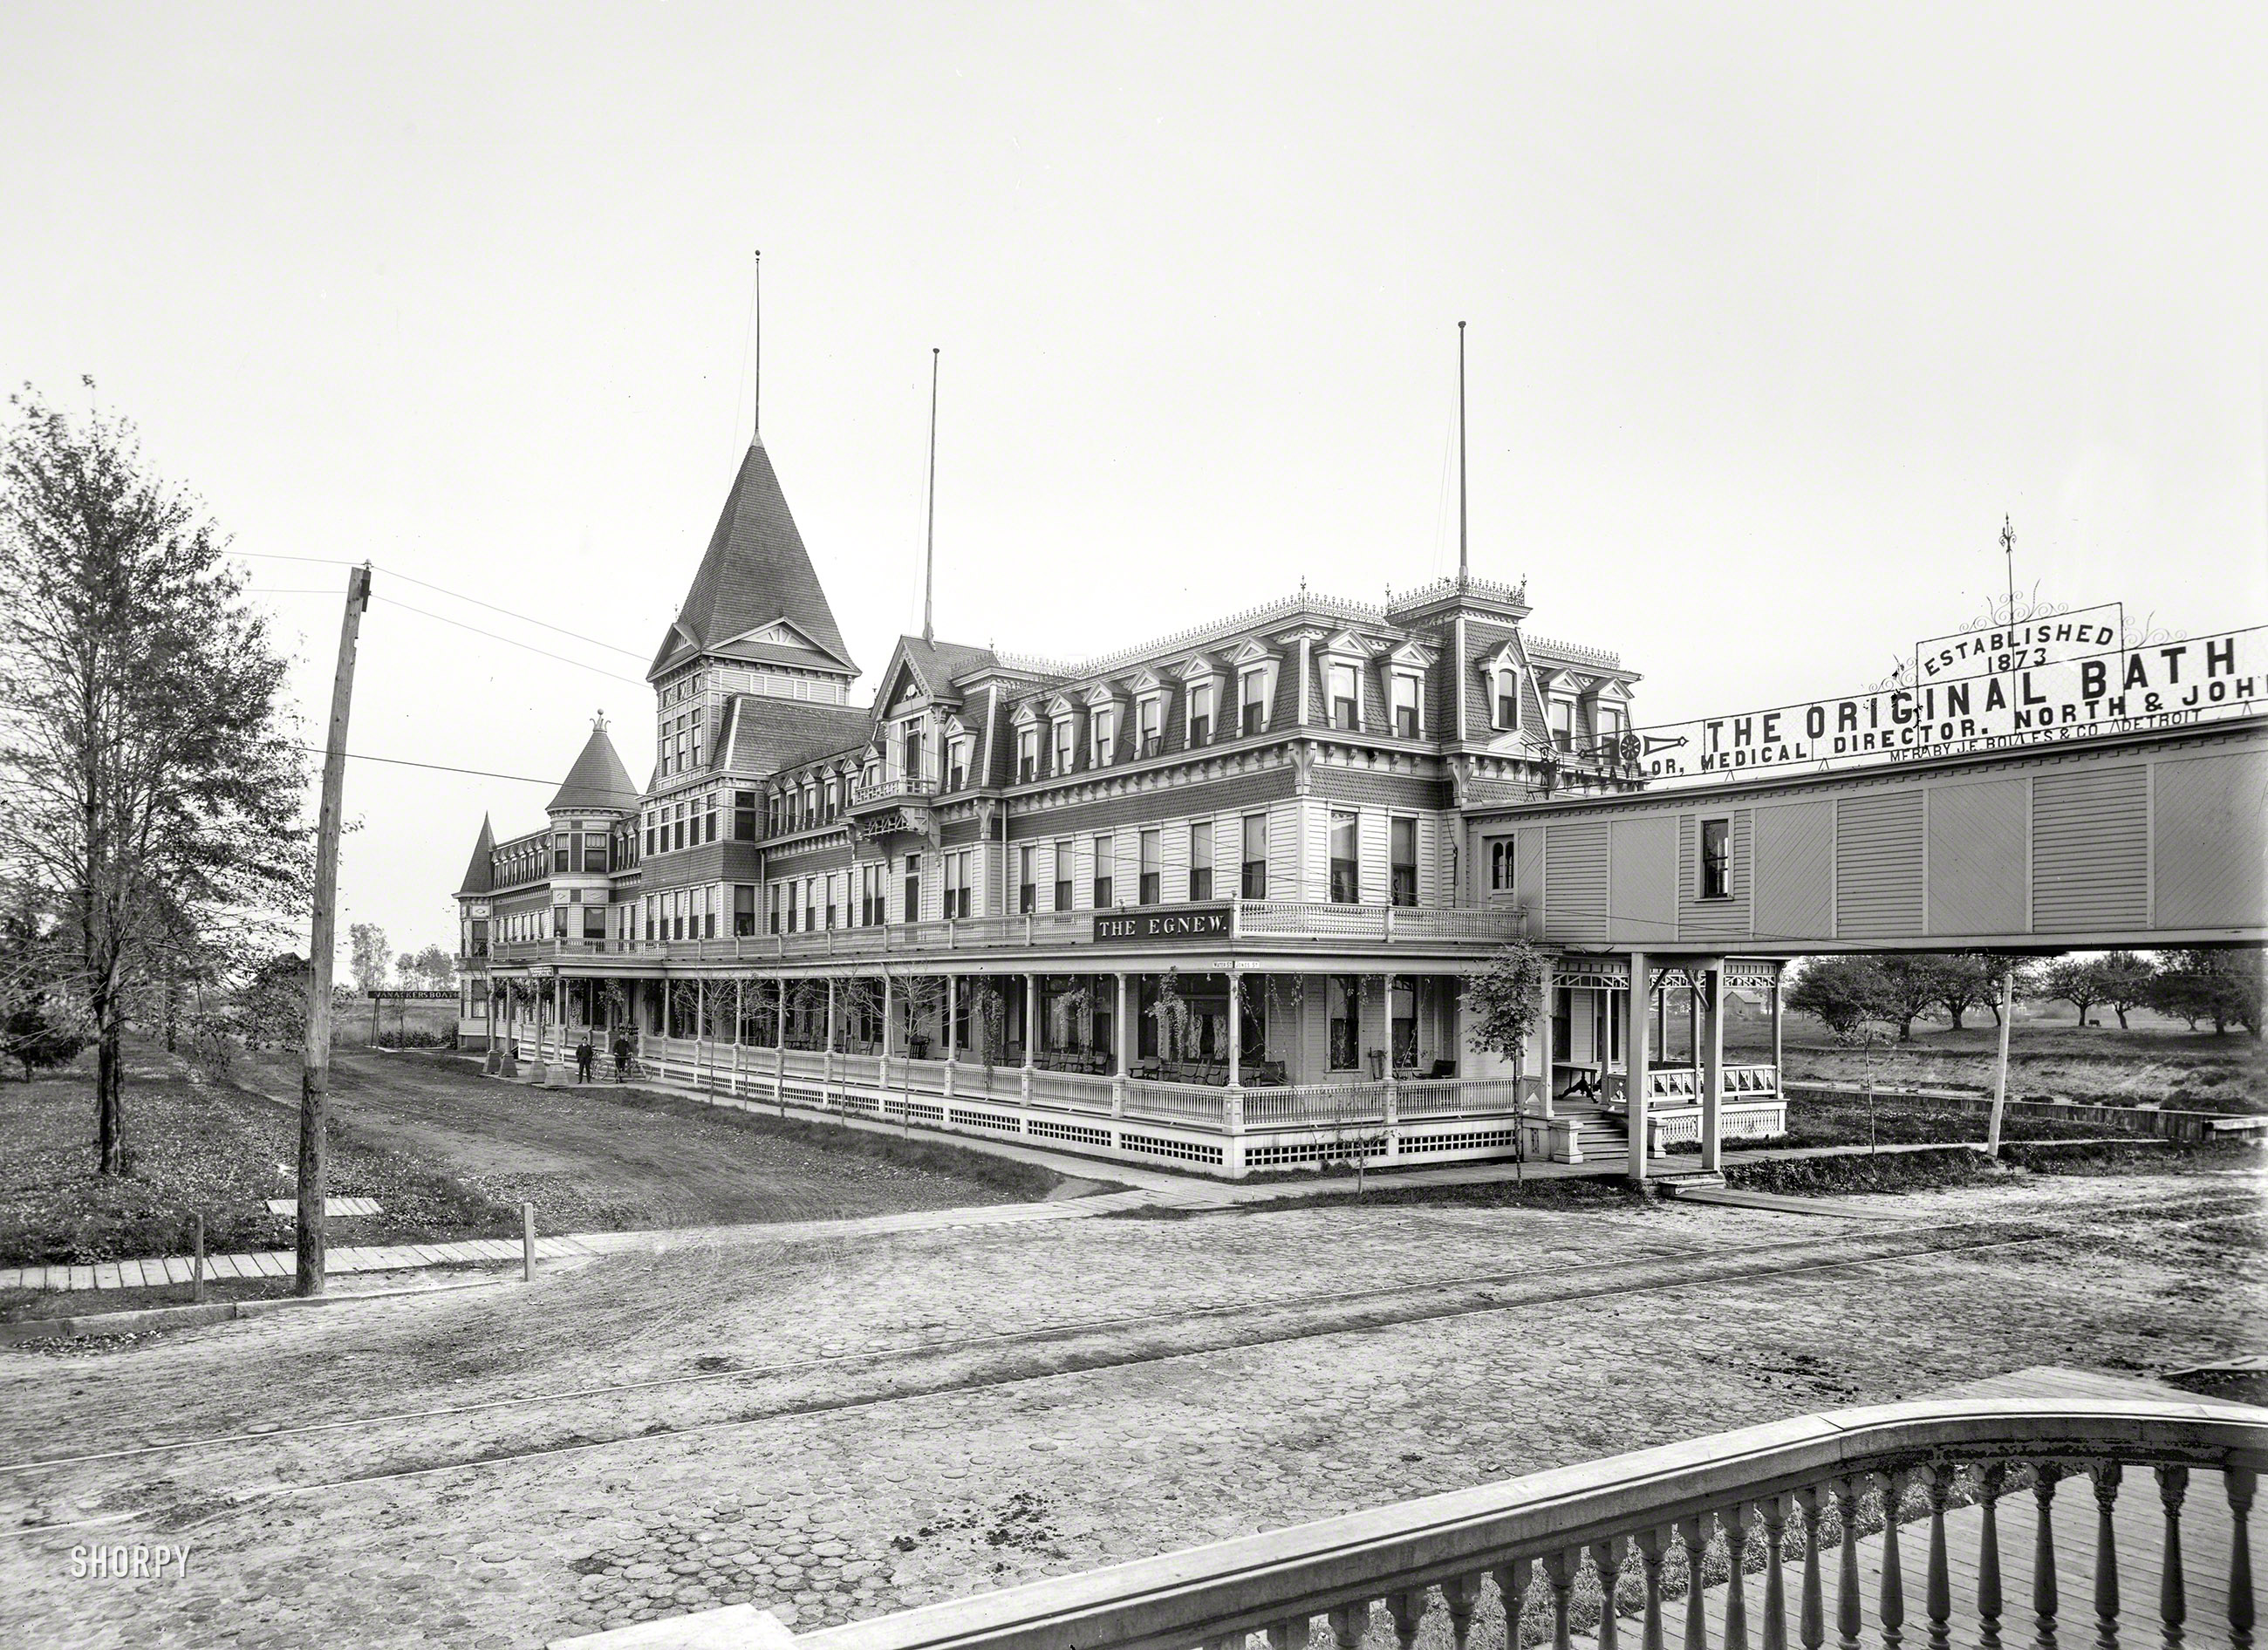 Mount Clemens, Mich., ca. 1899. "Egnew Hotel." Connected to THE ORIGINAL BATH HOUSE across the street. 8x10 inch glass negative. View full size.